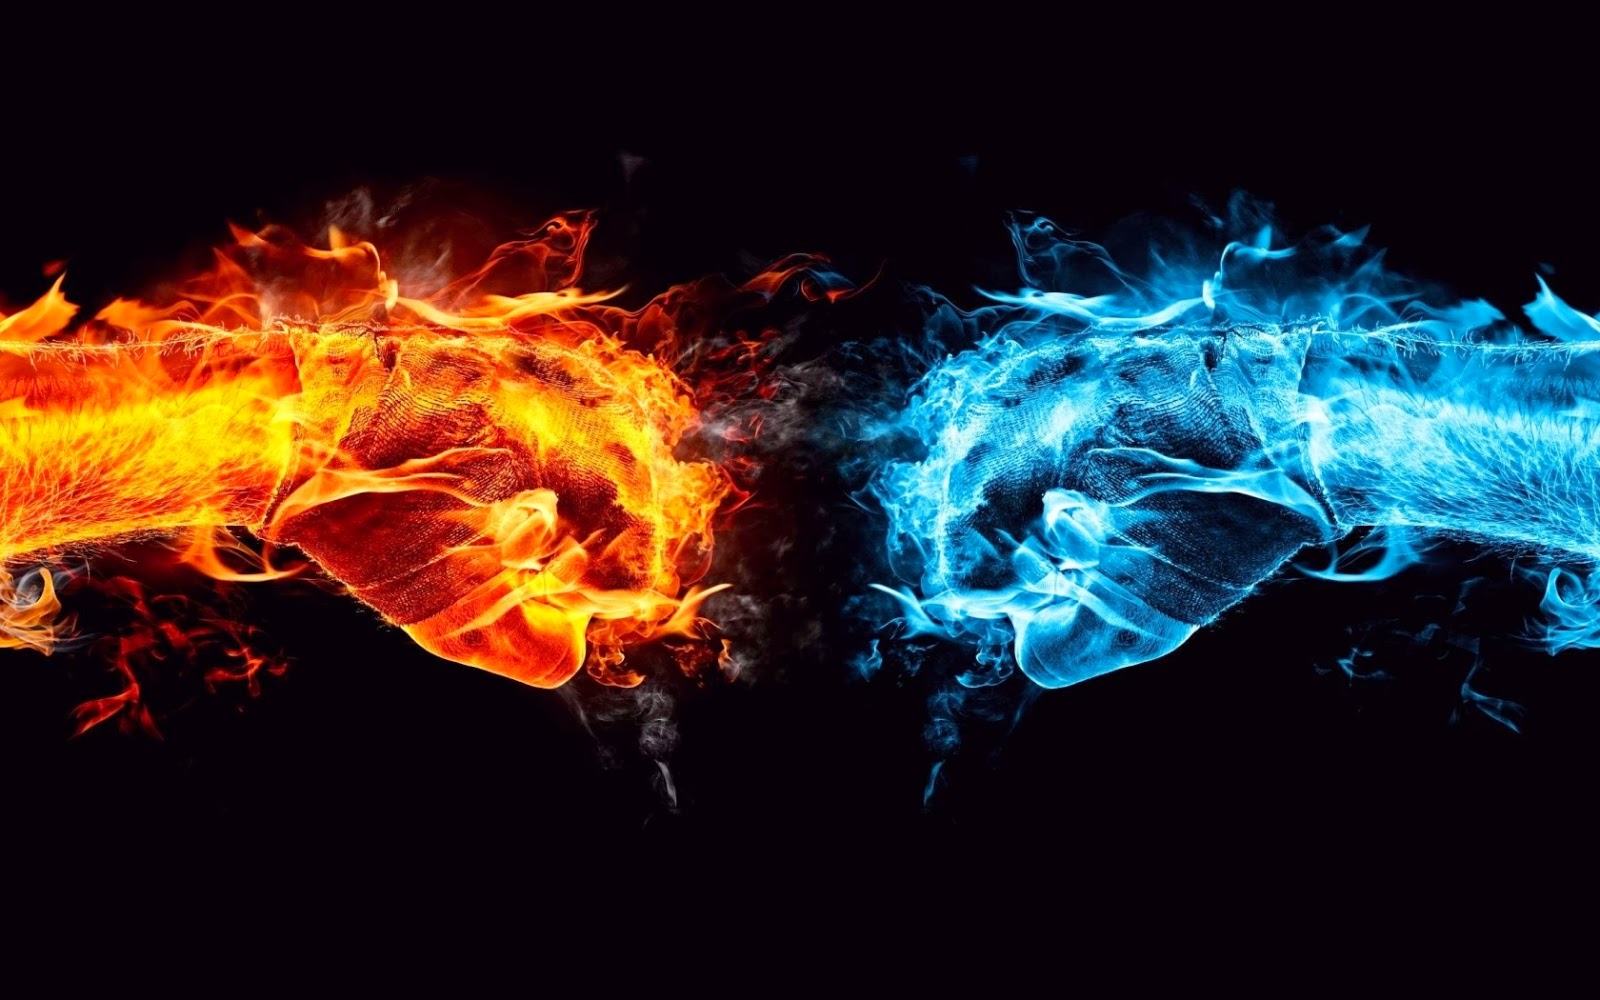 43+] Red and Blue Fire Wallpaper on WallpaperSafari